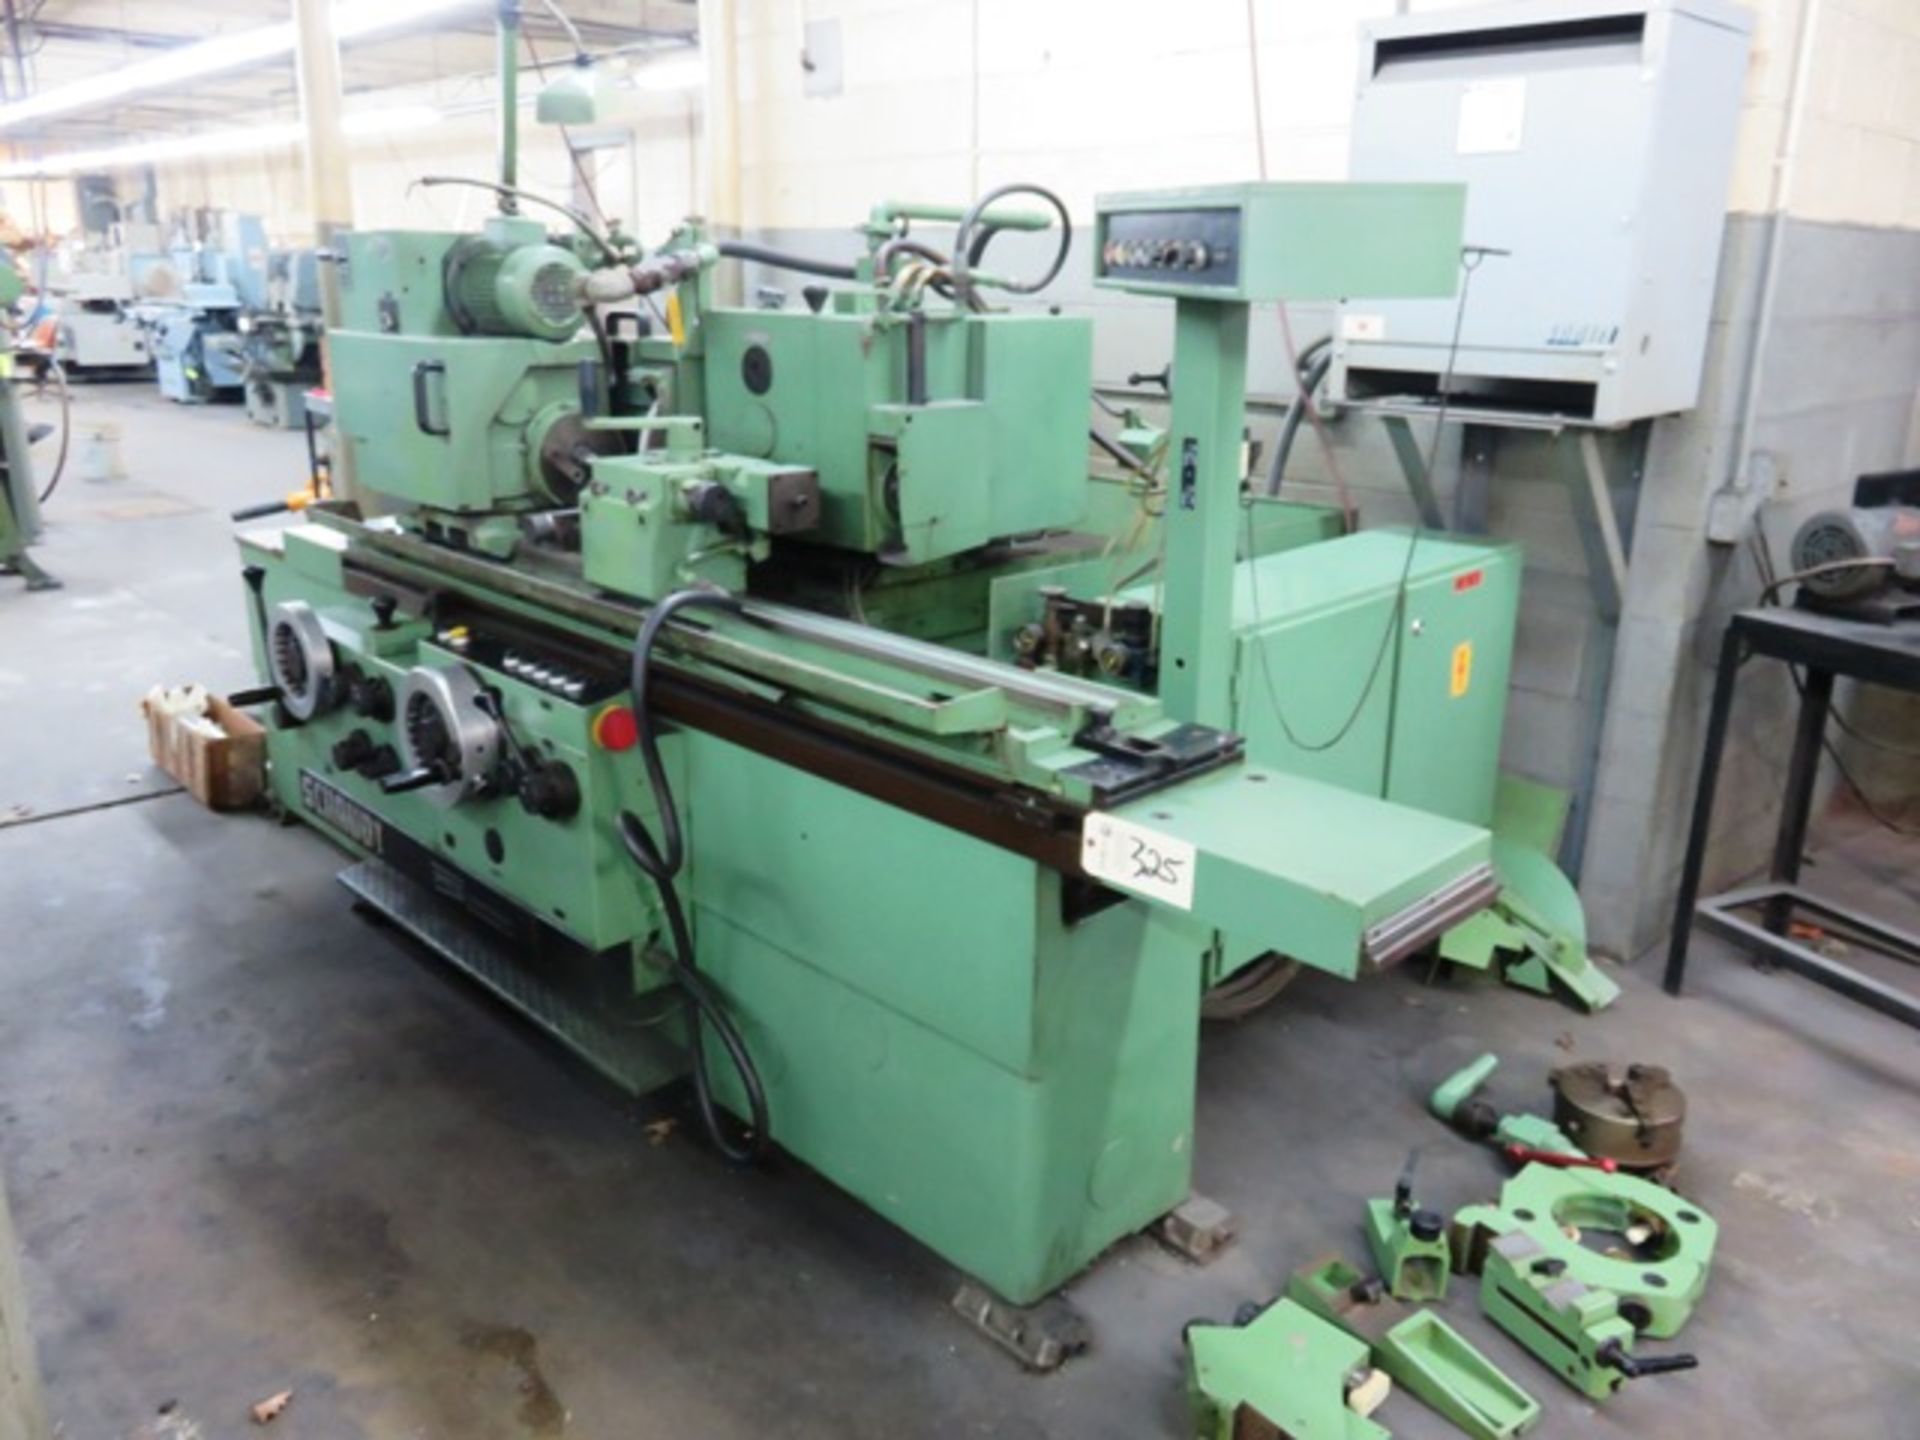 Schaudt Hydraulic Cylindrical Grinder with Approx 16'' x 40'' Capacity, Variable Workhead Speeds,